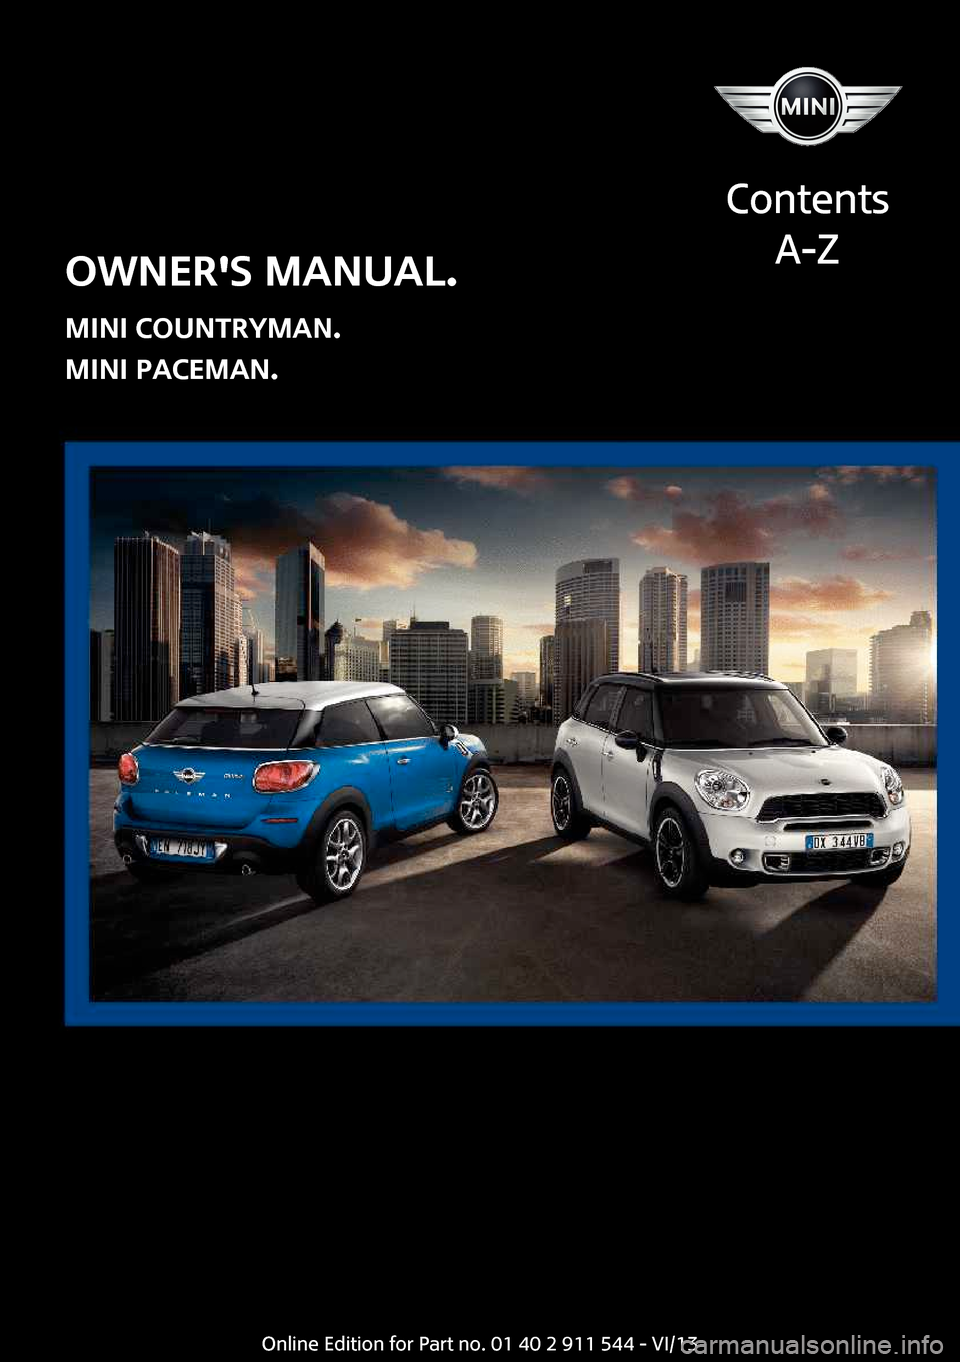 MINI Countryman 2014  Owners Manual (Mini Connected) Owners Manual.
MINI Countryman.
MINI Paceman.
Contents
A-ZOnline Edition for Part no. 01 40 2 911 544 - VI/13  